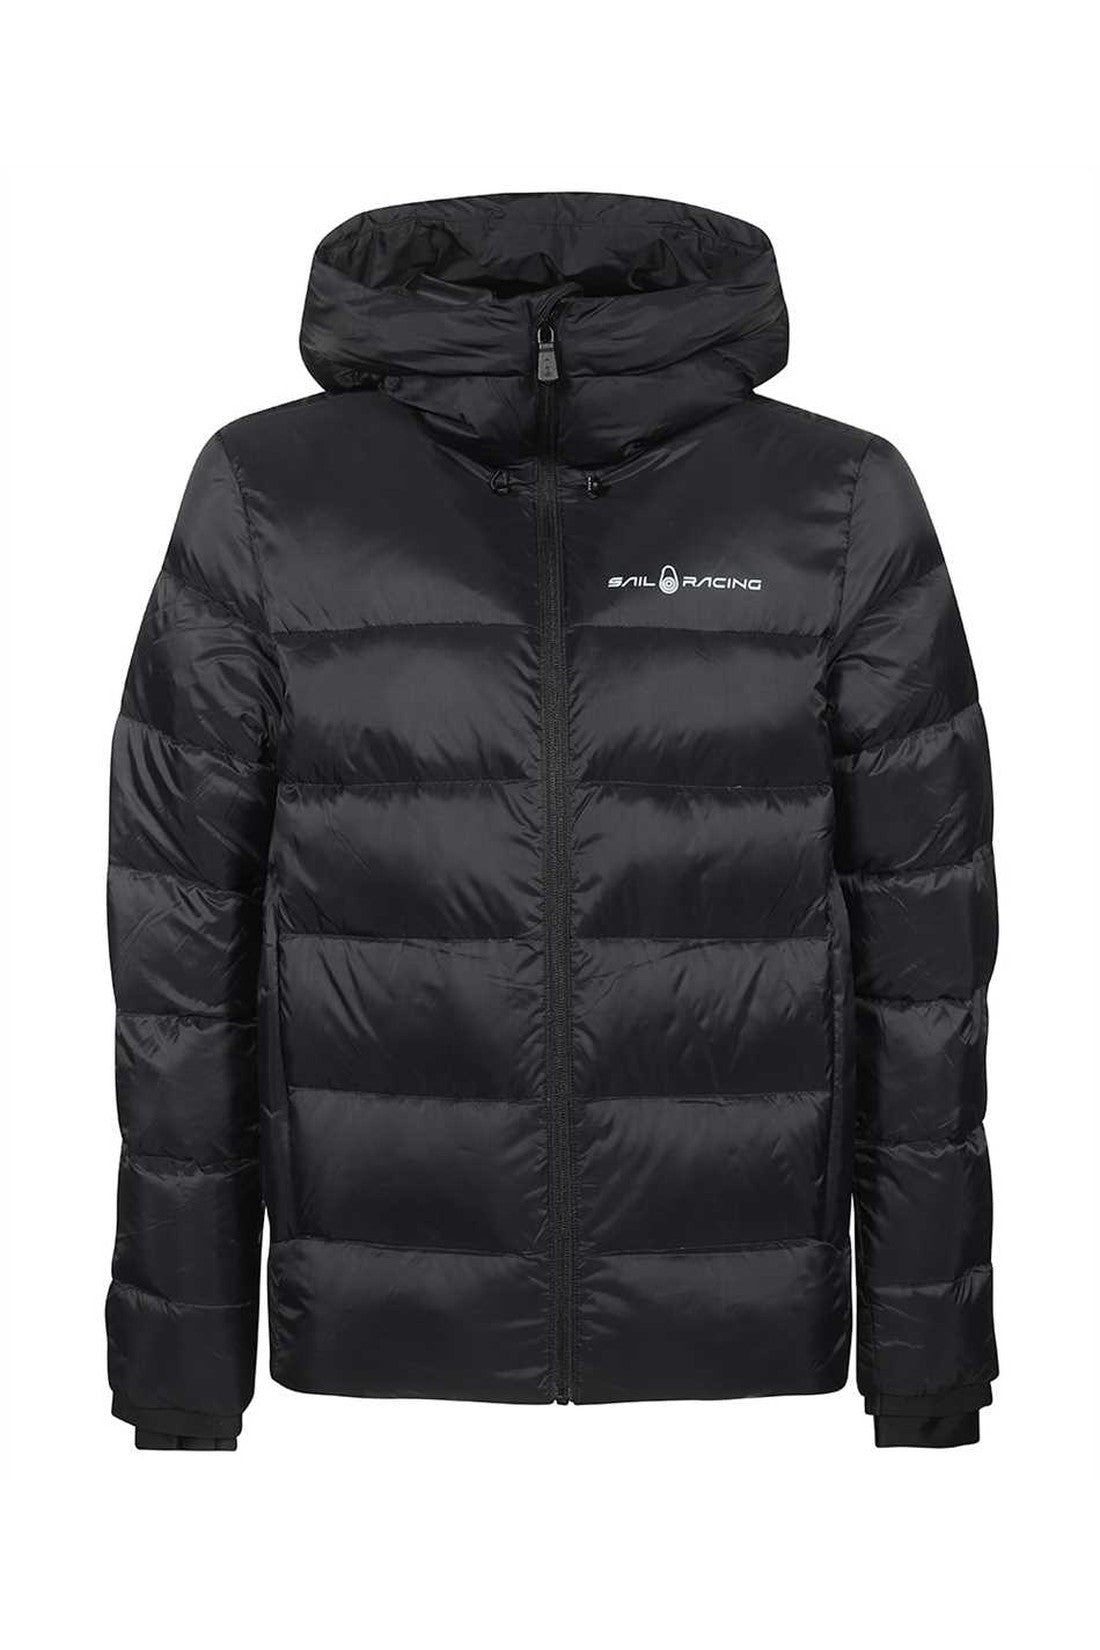 Hooded down jacket-Sail Racing-OUTLET-SALE-L-ARCHIVIST